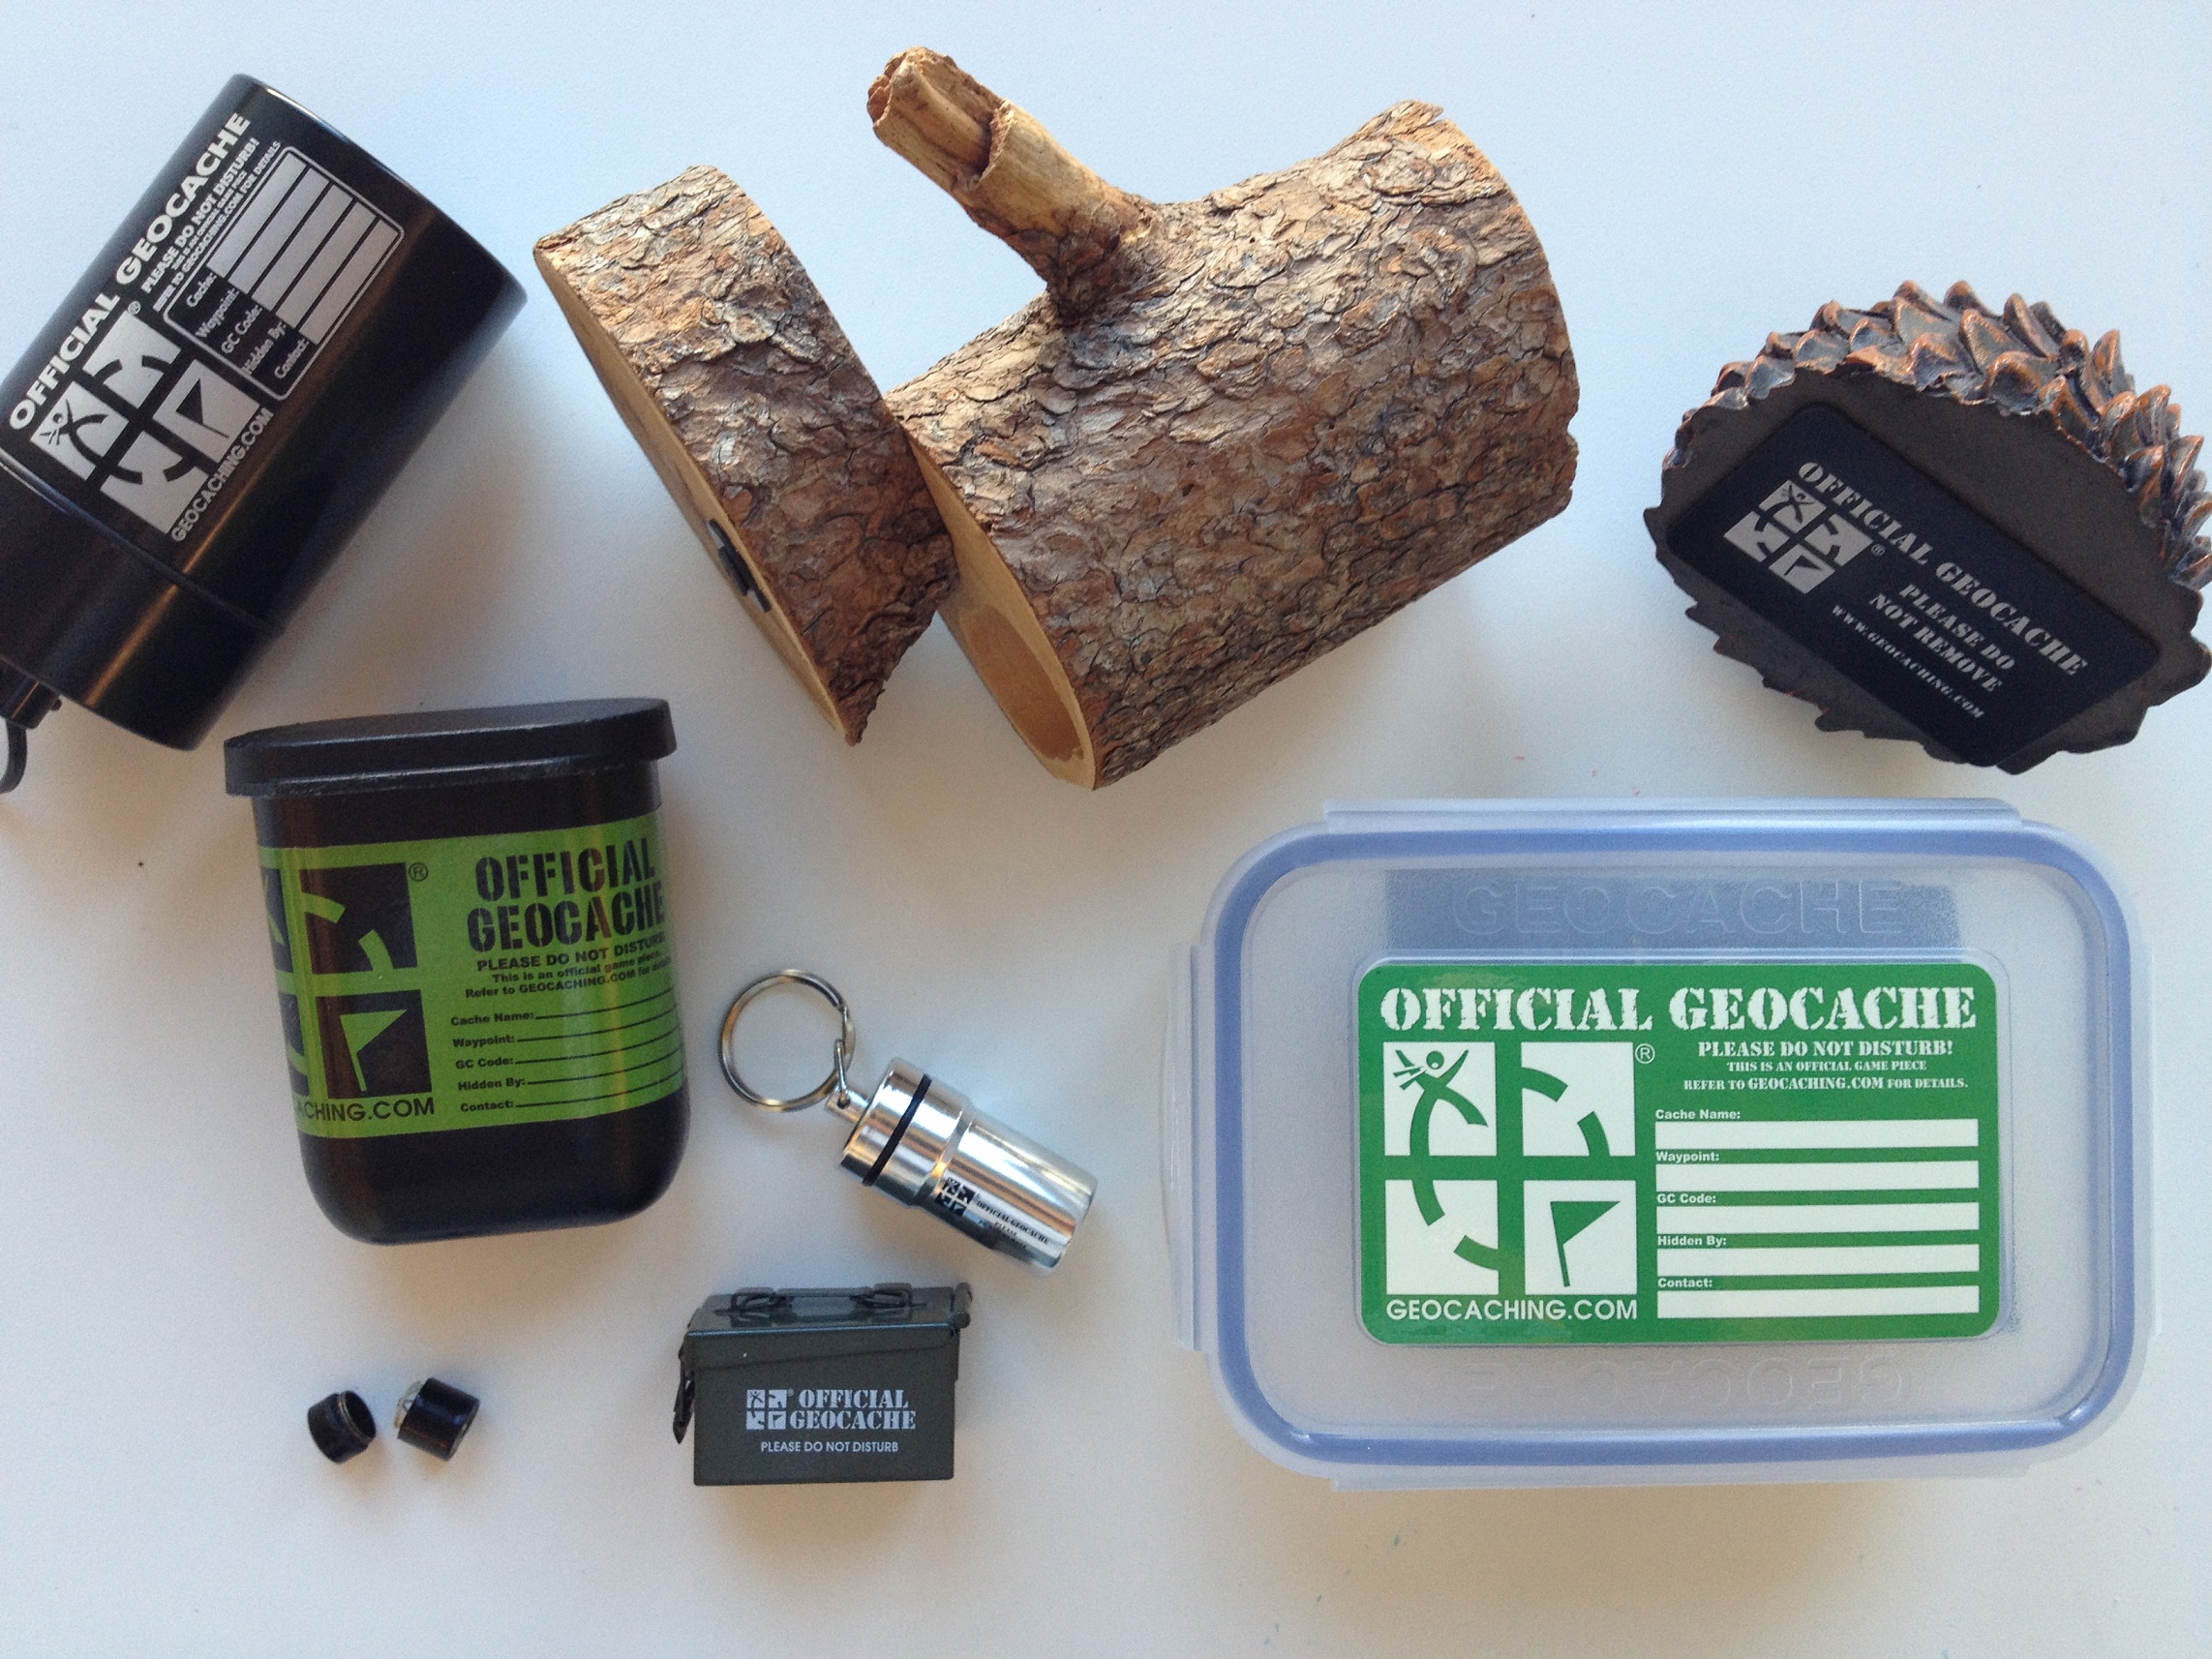 What Does a Geocache Look Like? - Peanuts or Pretzels